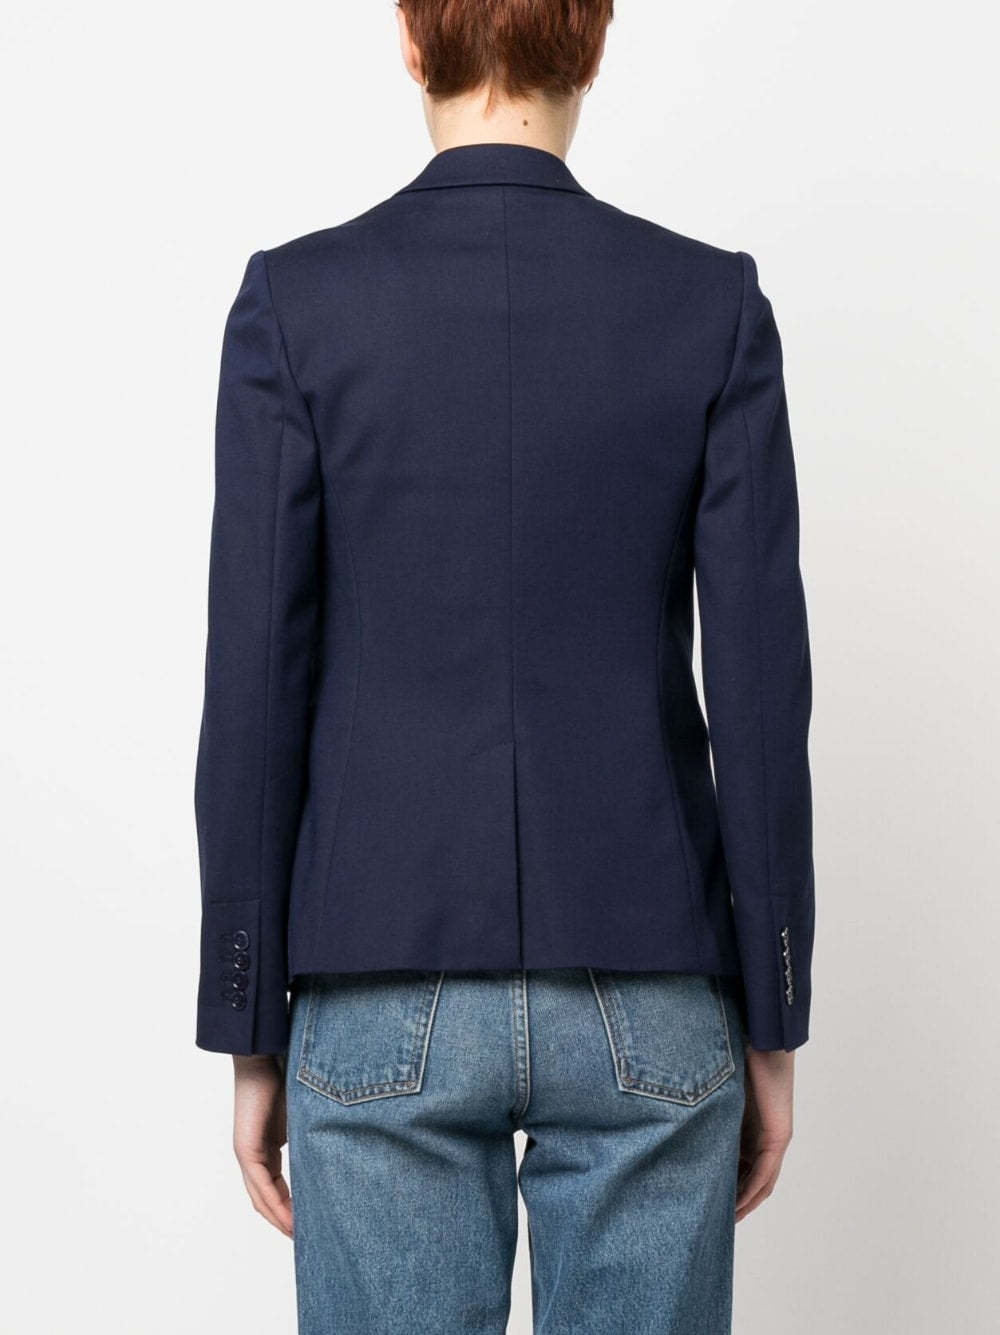 Cotton single-breasted jacket